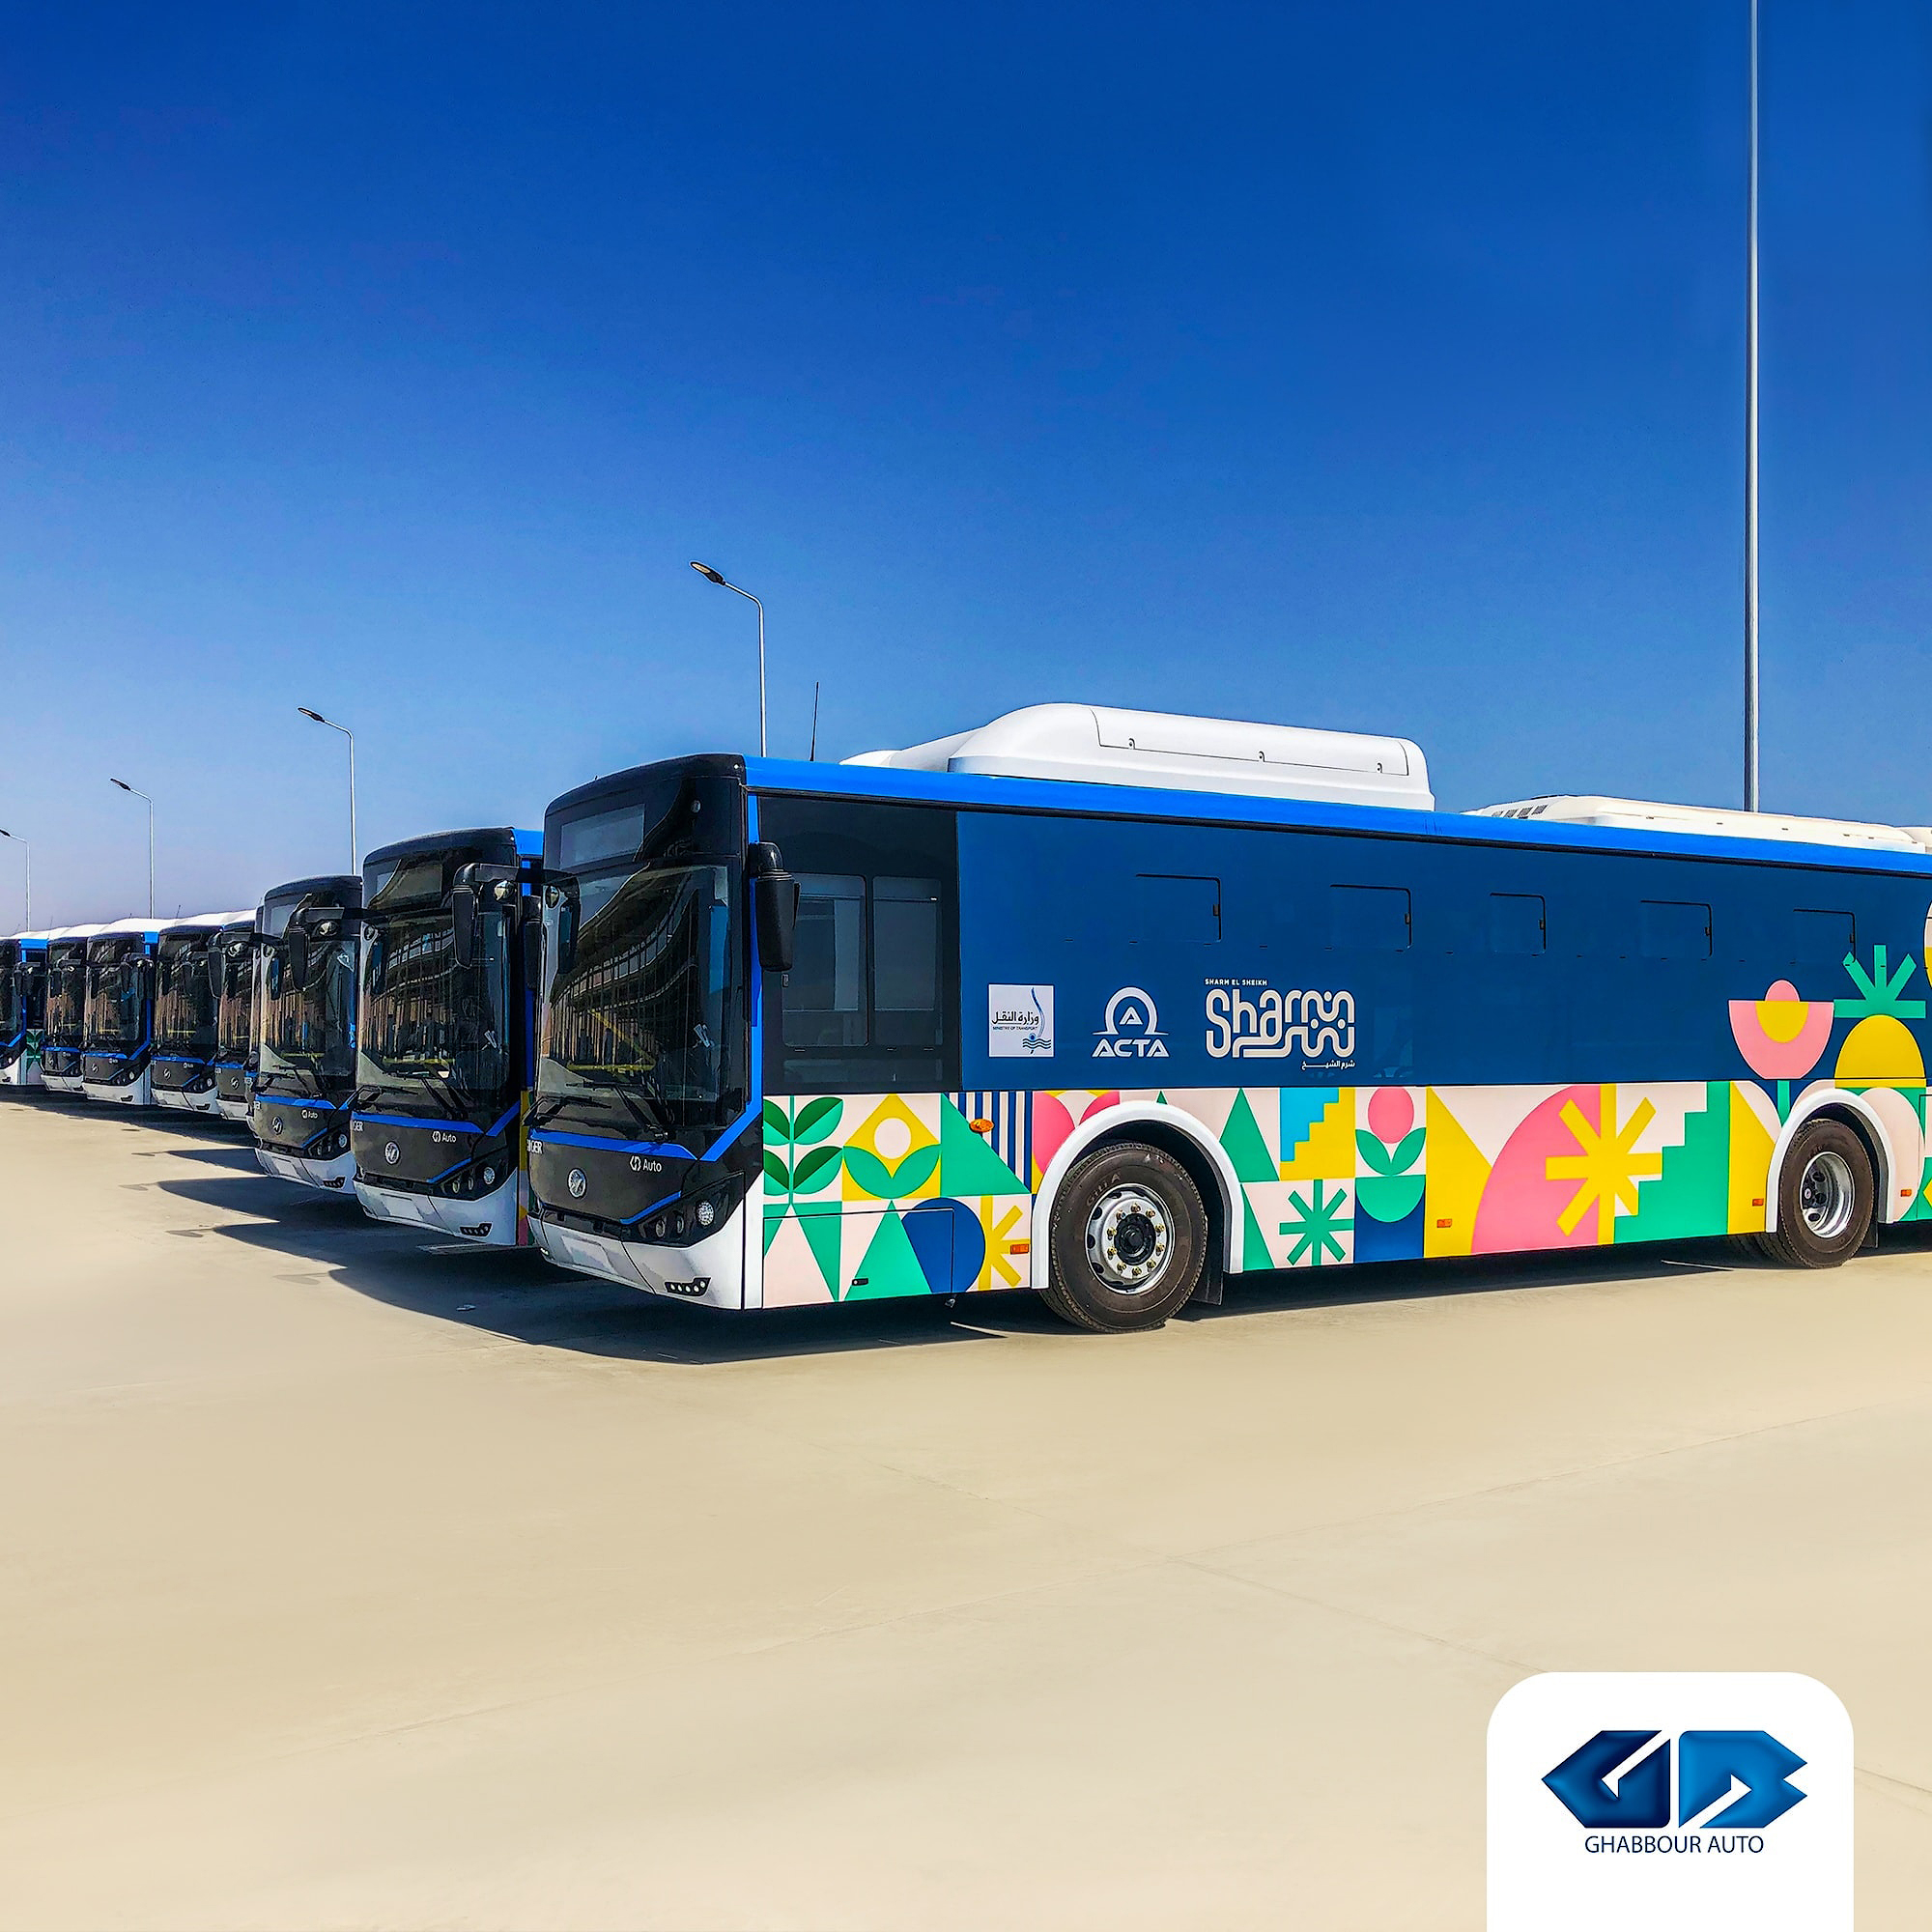 Higer Bus Company serves COP27 in Egypt with electric buses